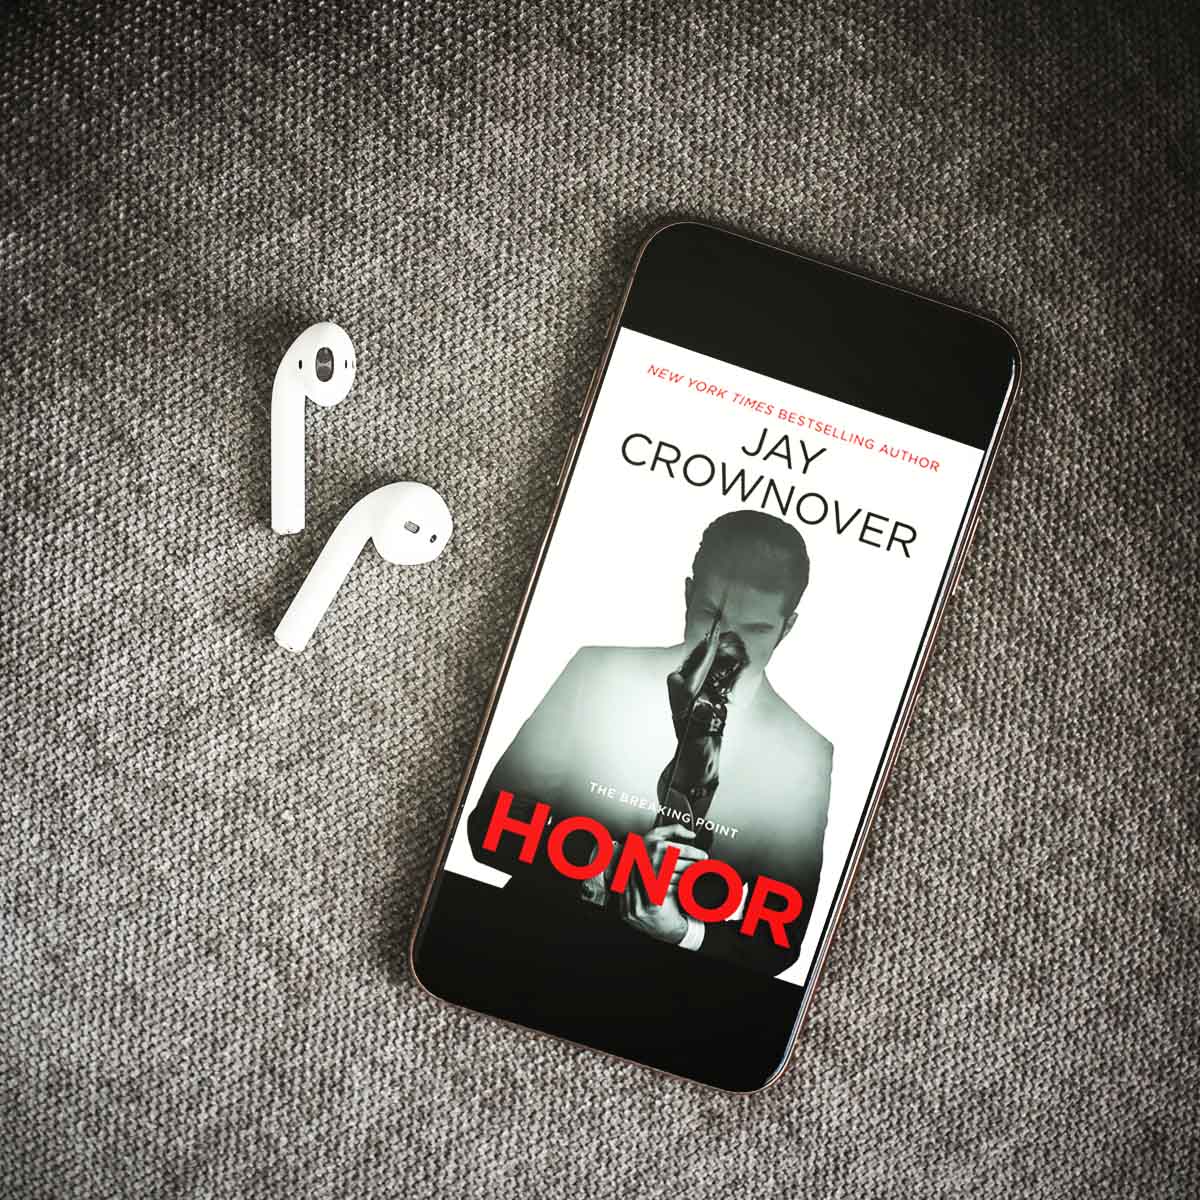 Honor by Jay Crownover is the first book in the spin-off series of her Welcome to the Point series and it's a dark and gritty look into the fight for survival in the mafia underworld